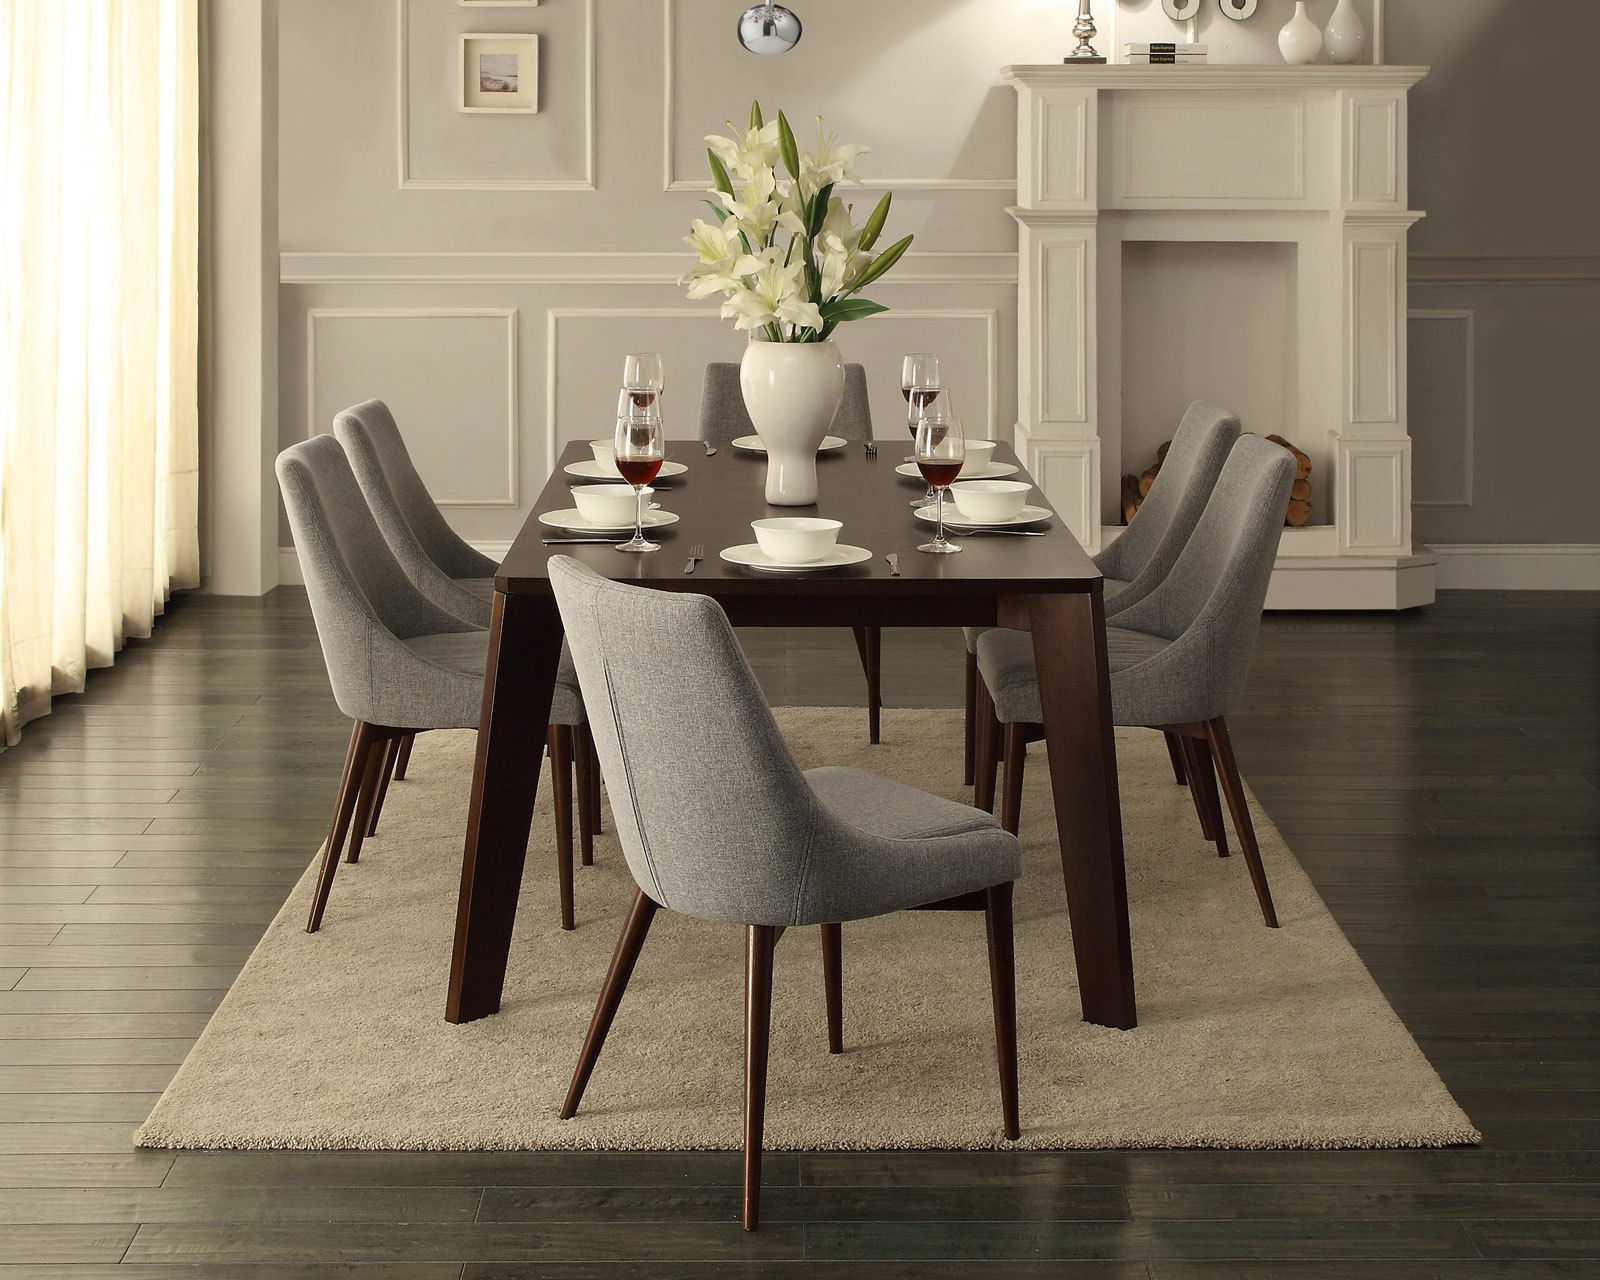 modern dining room chairs images